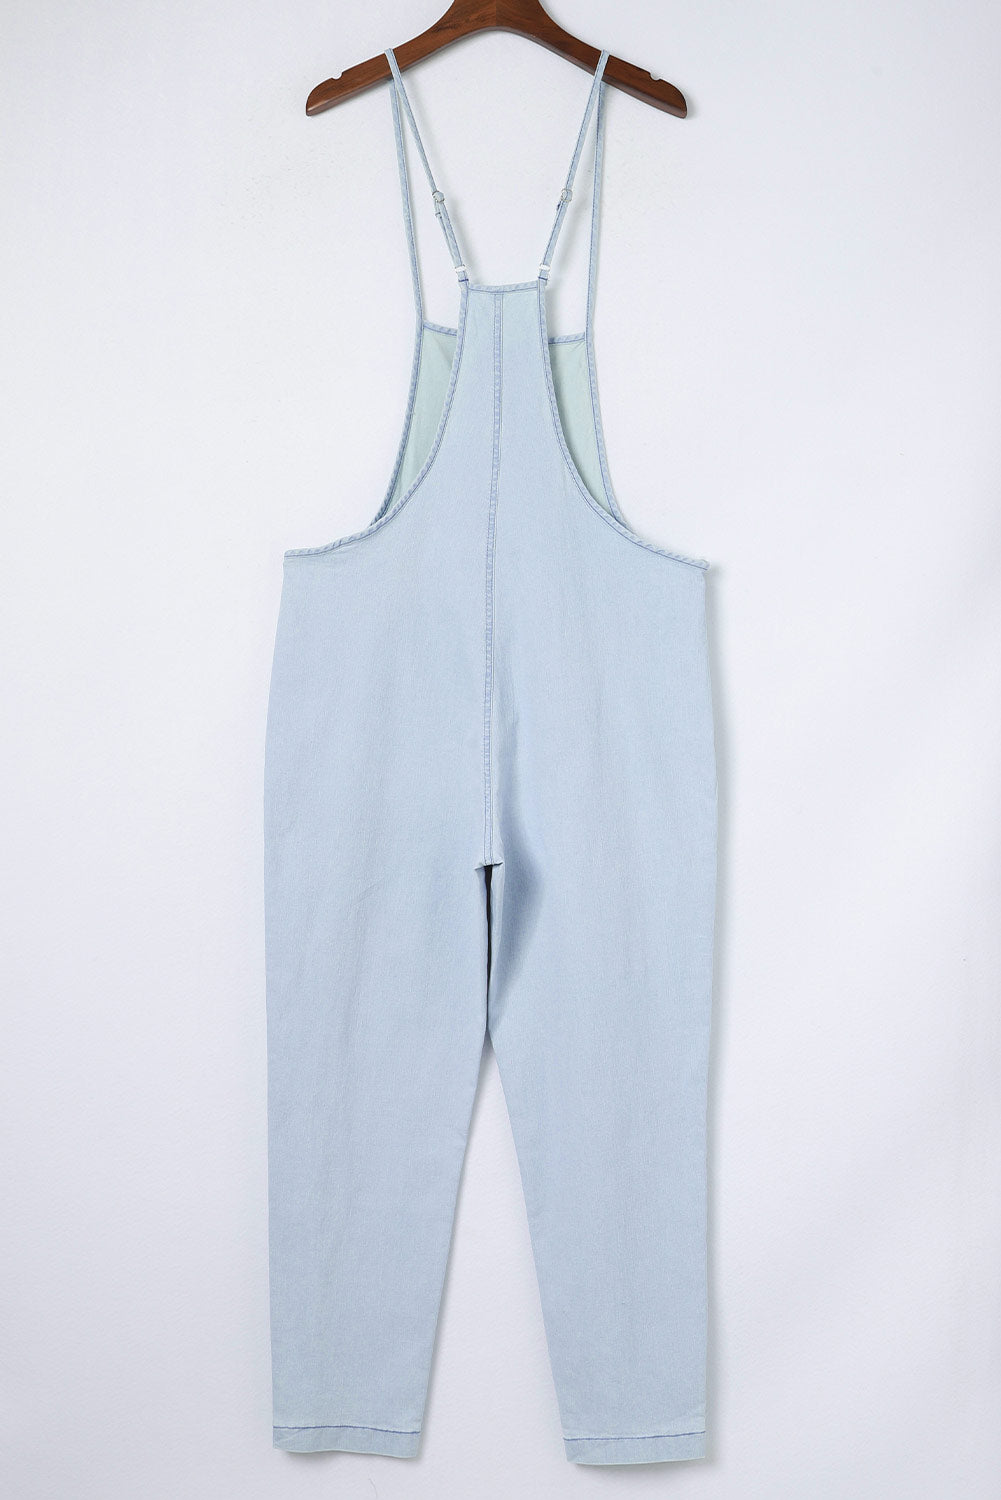 Sky Blue Chambray Pocketed Adjustable Straps Jumpsuit